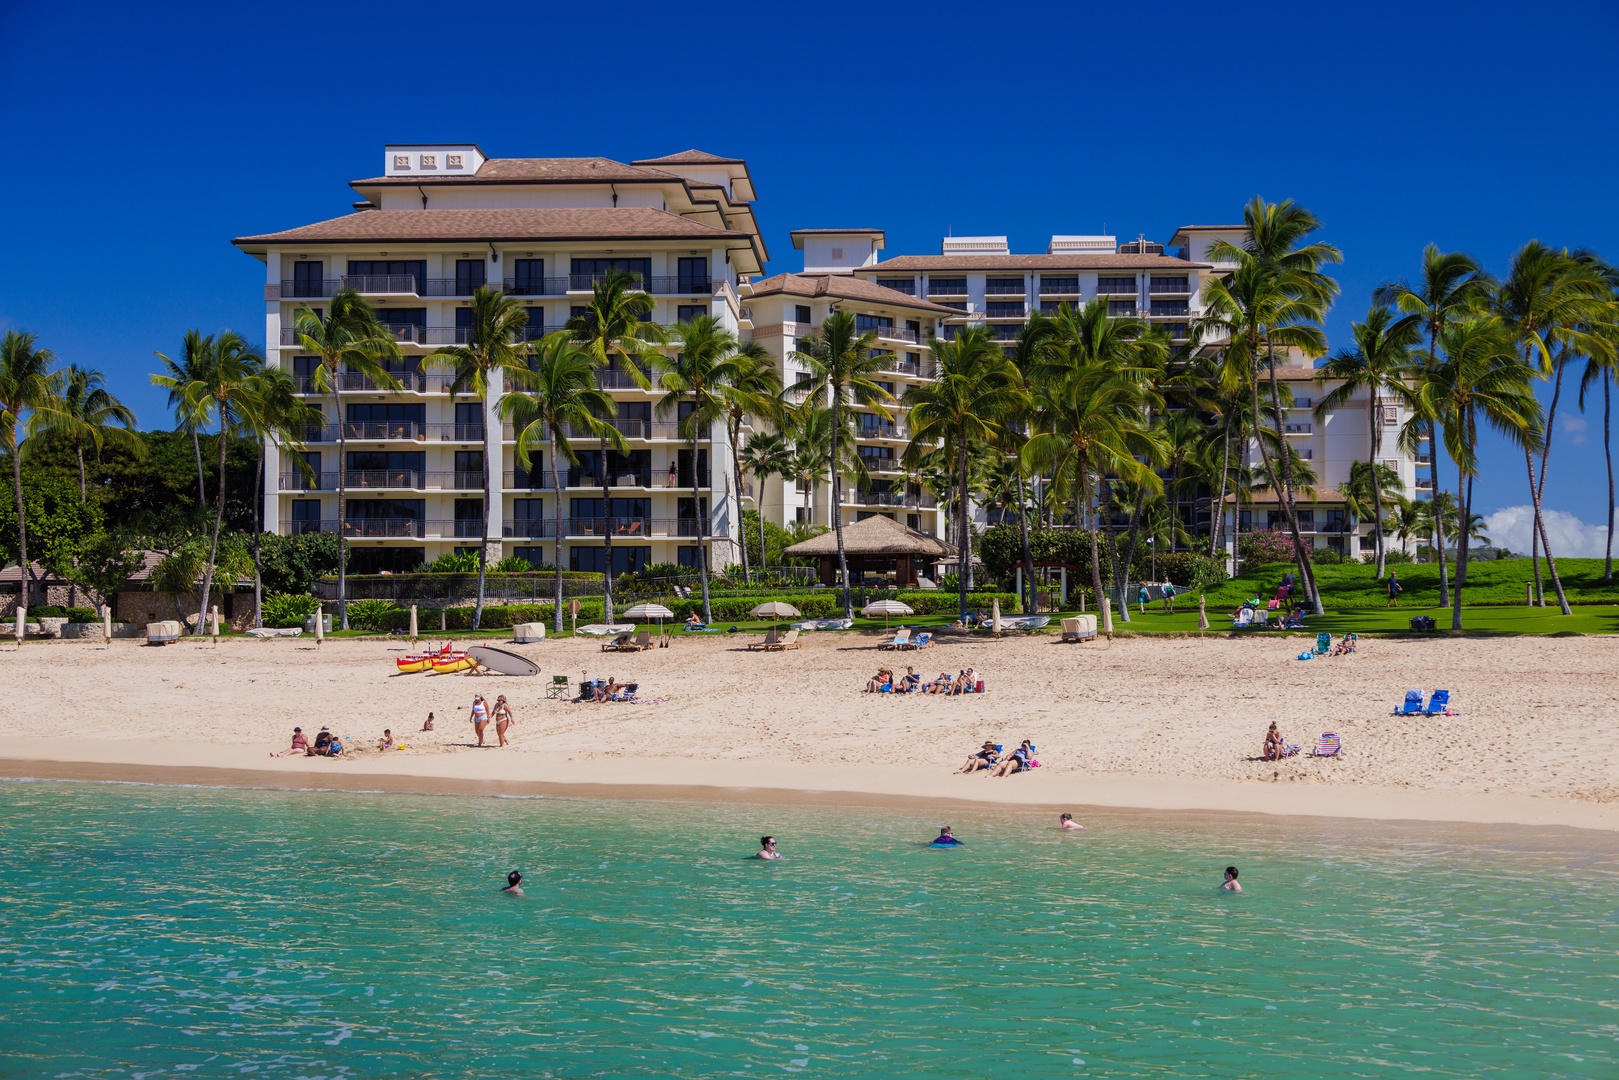 Kapolei Vacation Rentals, Ko Olina Kai 1083C - Ko Olina's private lagoons with soft sands and crystal blue water, perfect for afternoon swim or spectacular views.